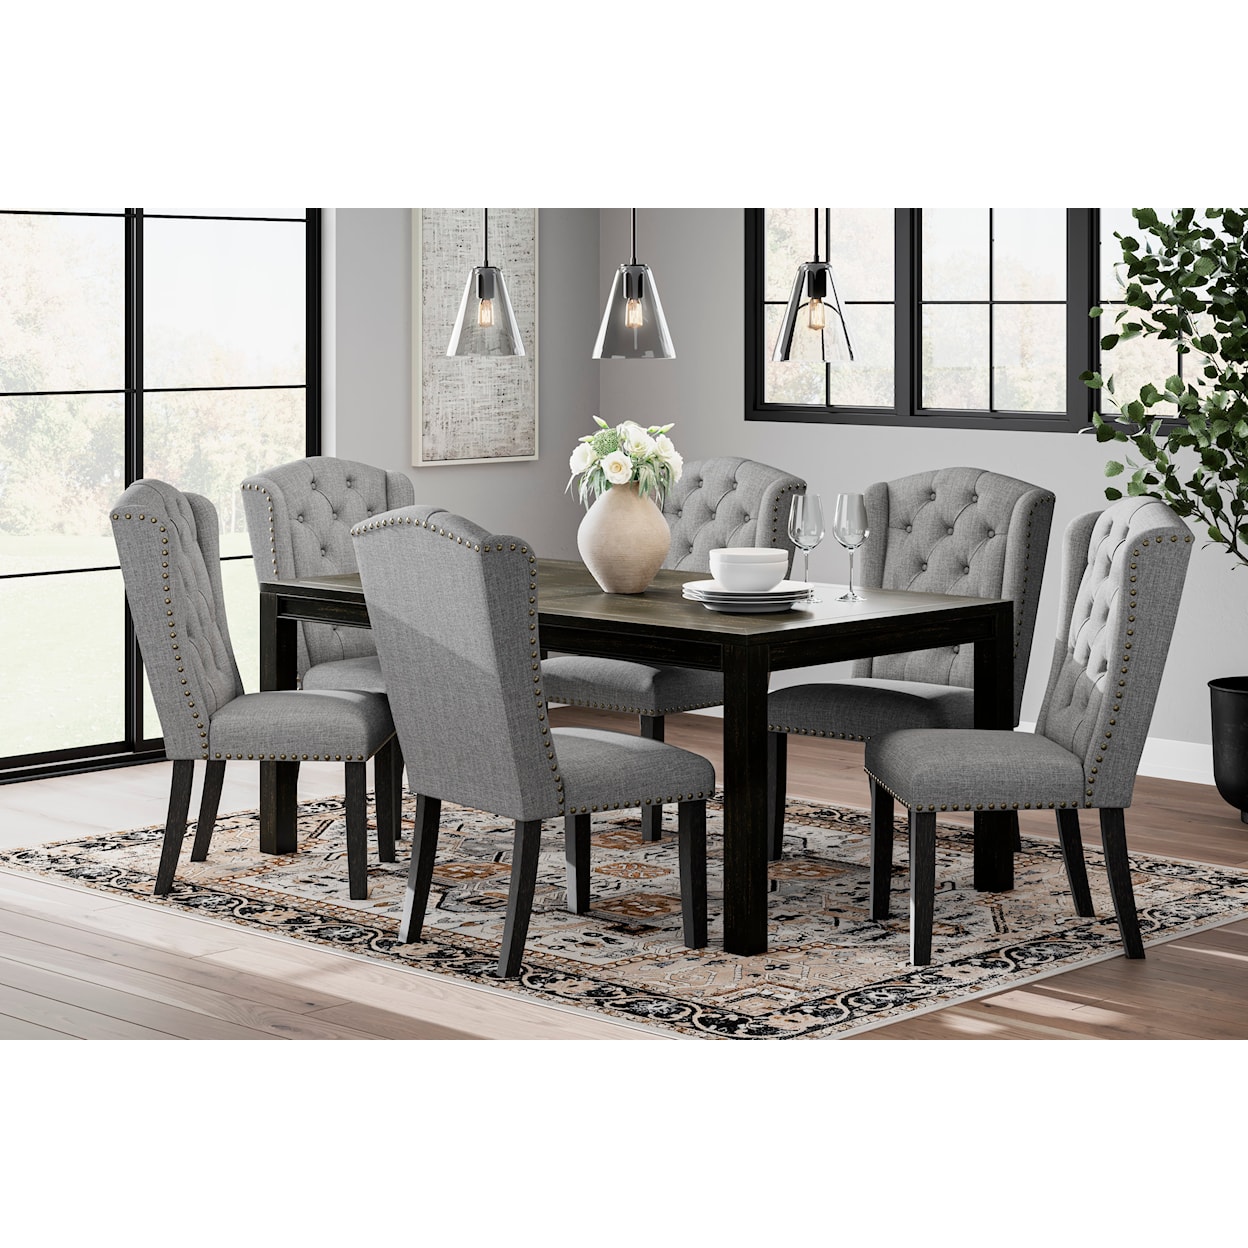 Benchcraft Jeanette 7-Piece Dining Set